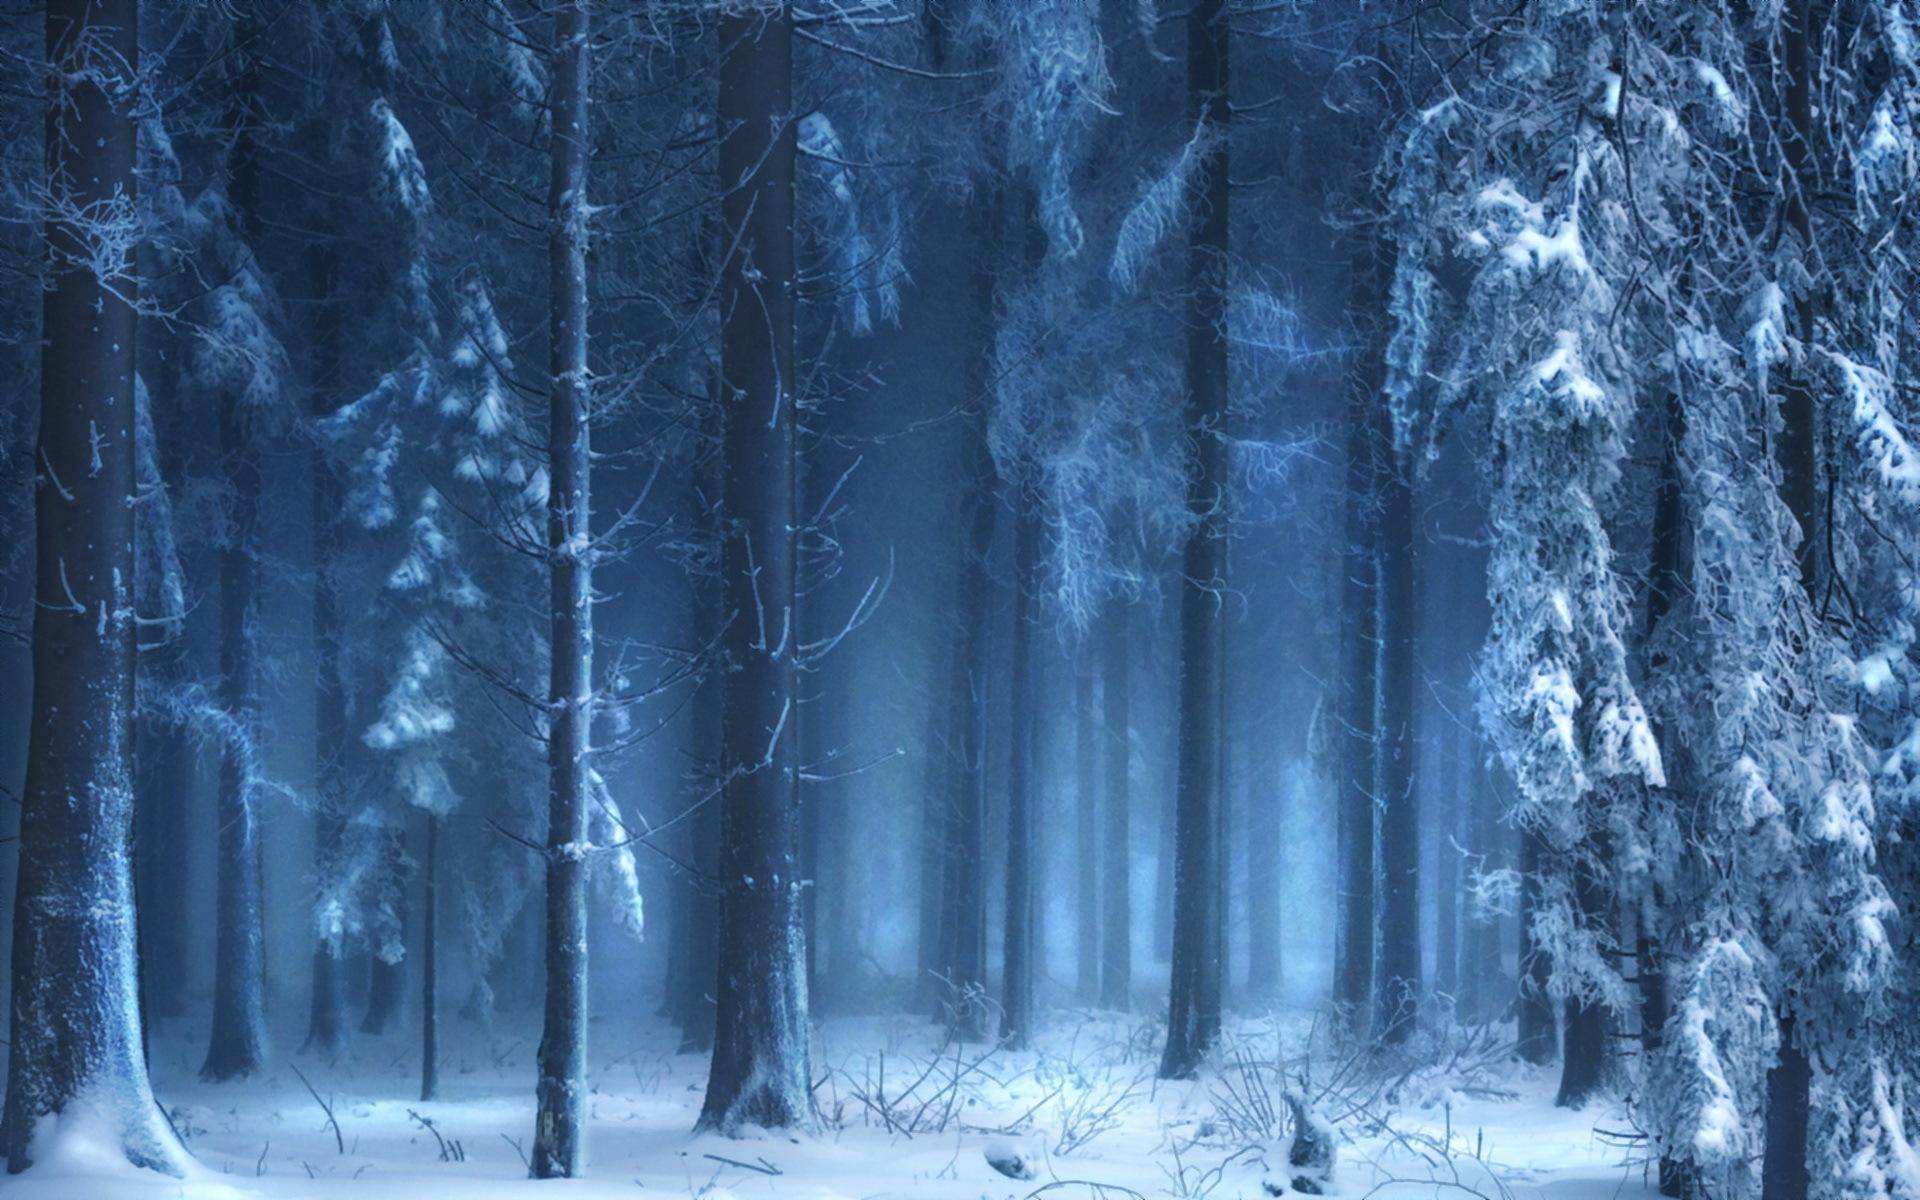 189909 Blue Frozen Forest Wallpaper Hd image backgrounds free